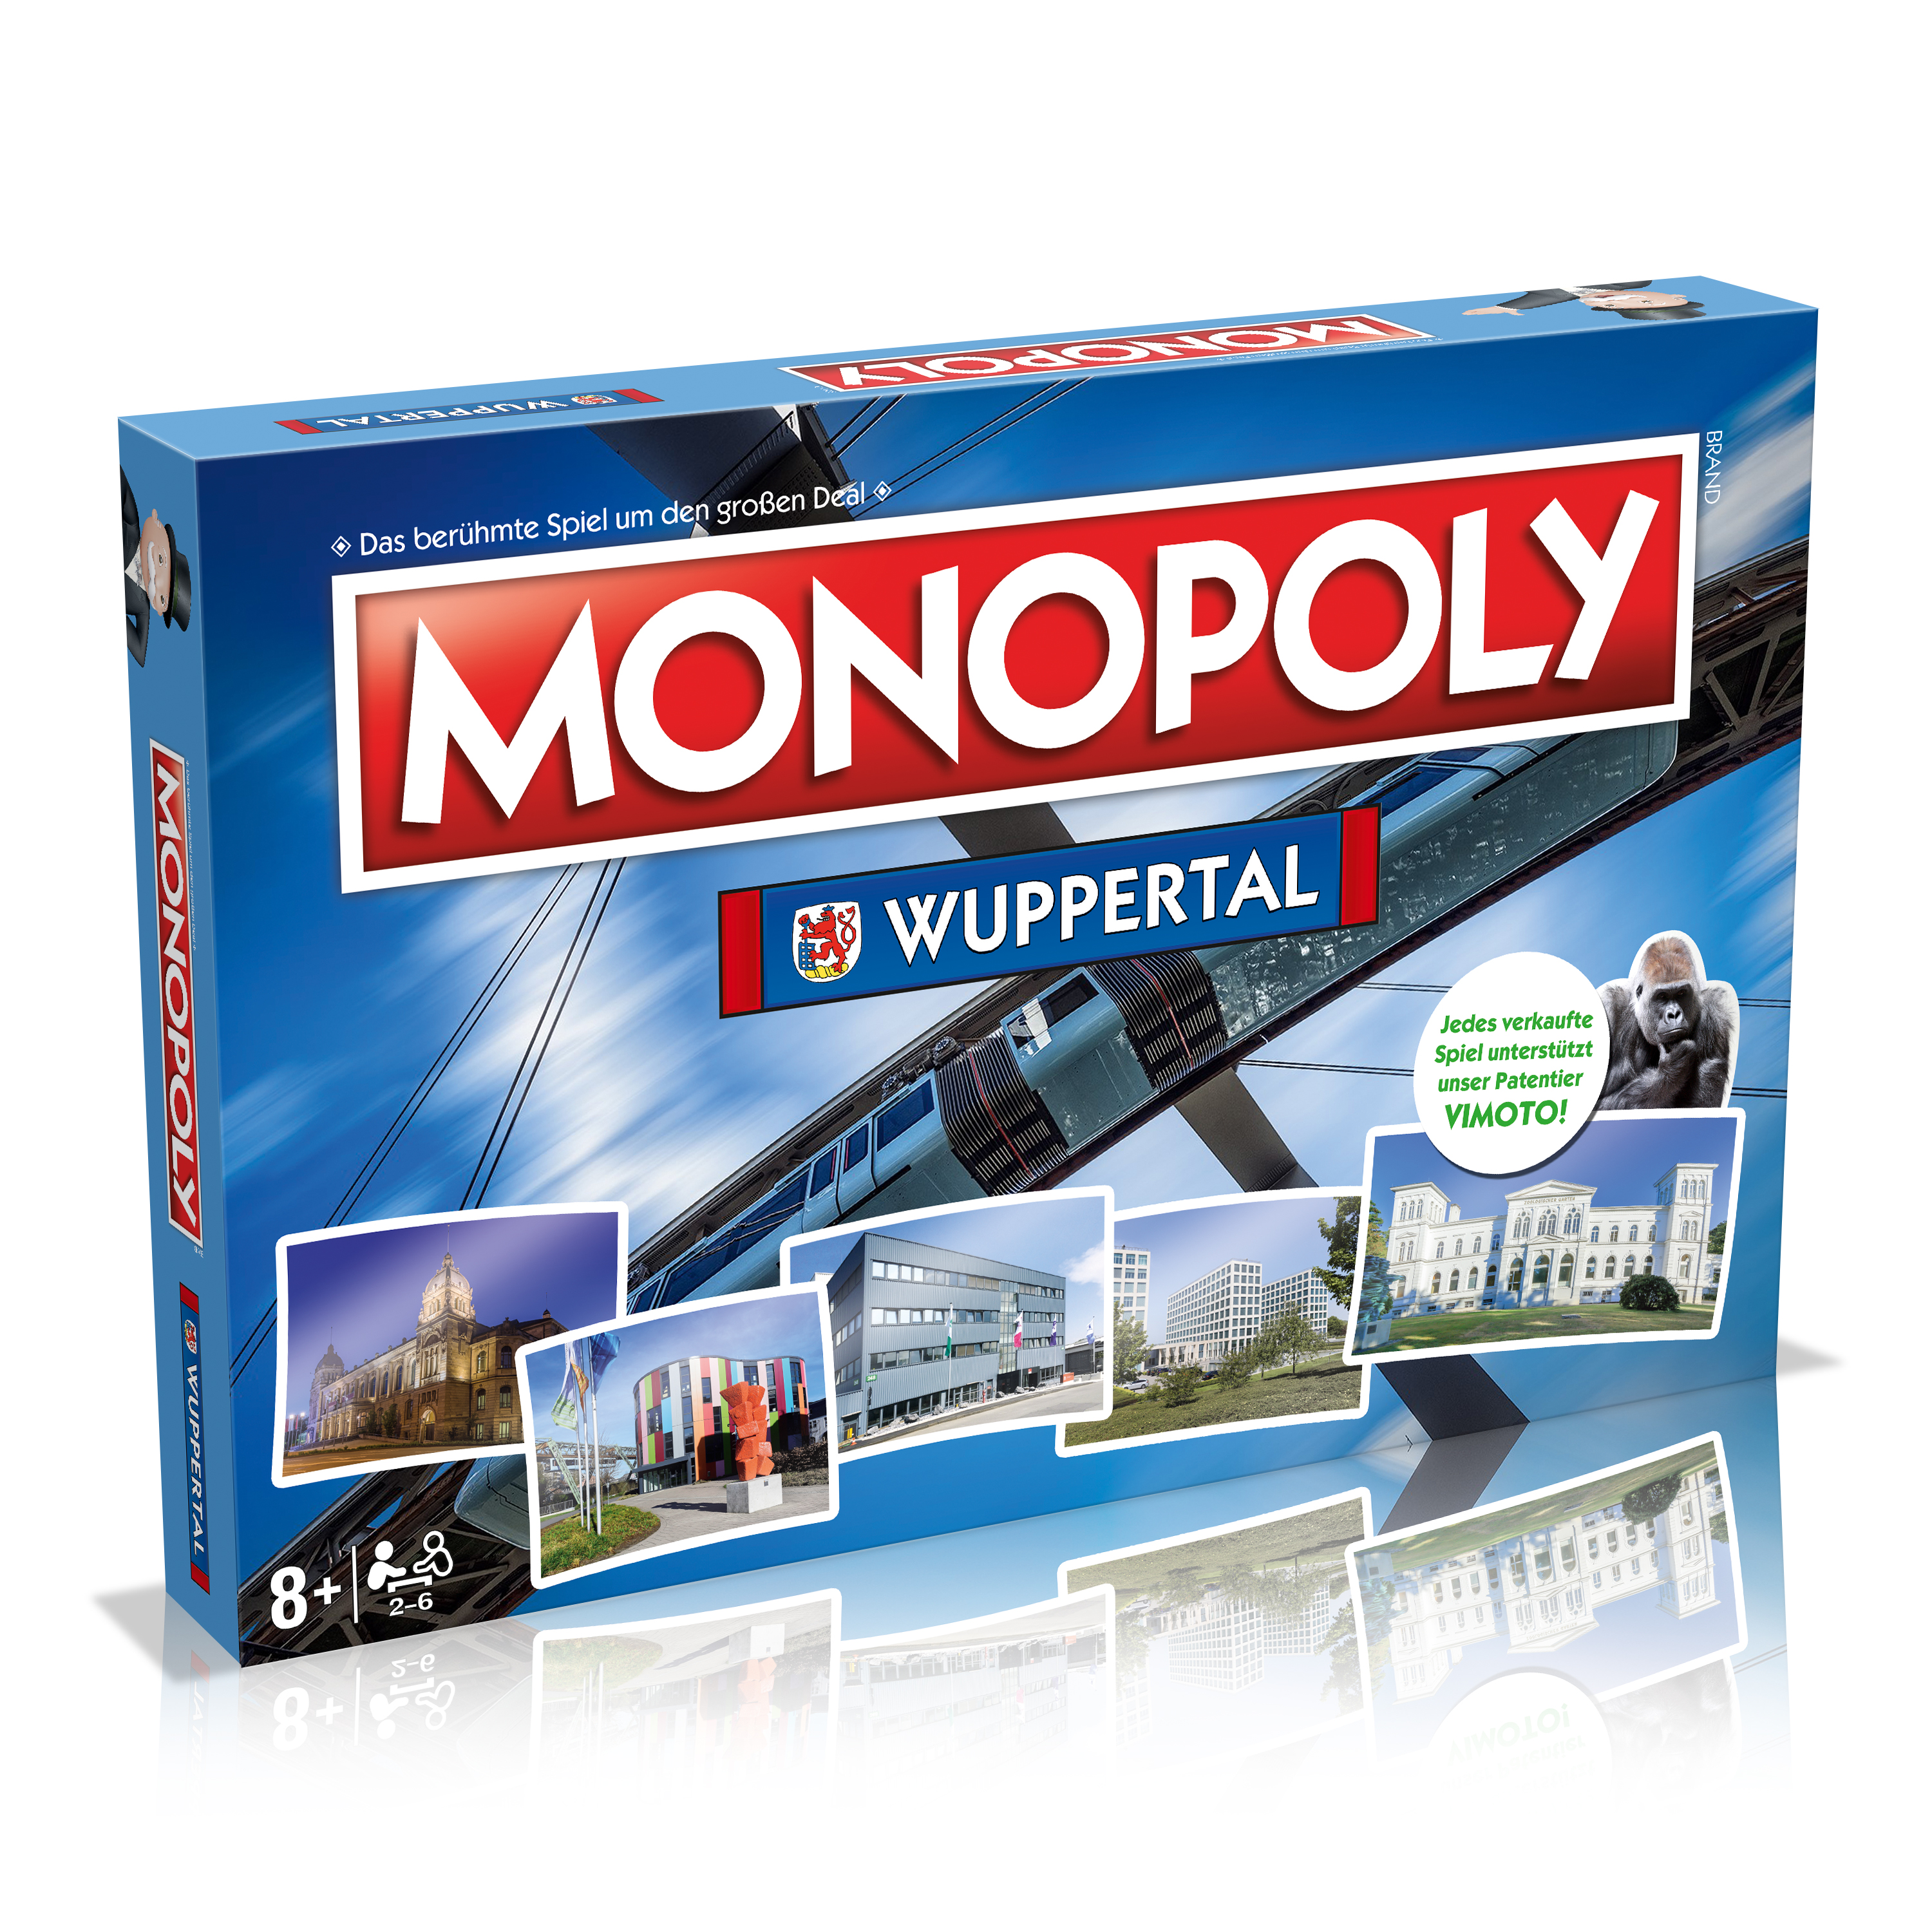 Monopoly Wuppertal (Neuauflage)